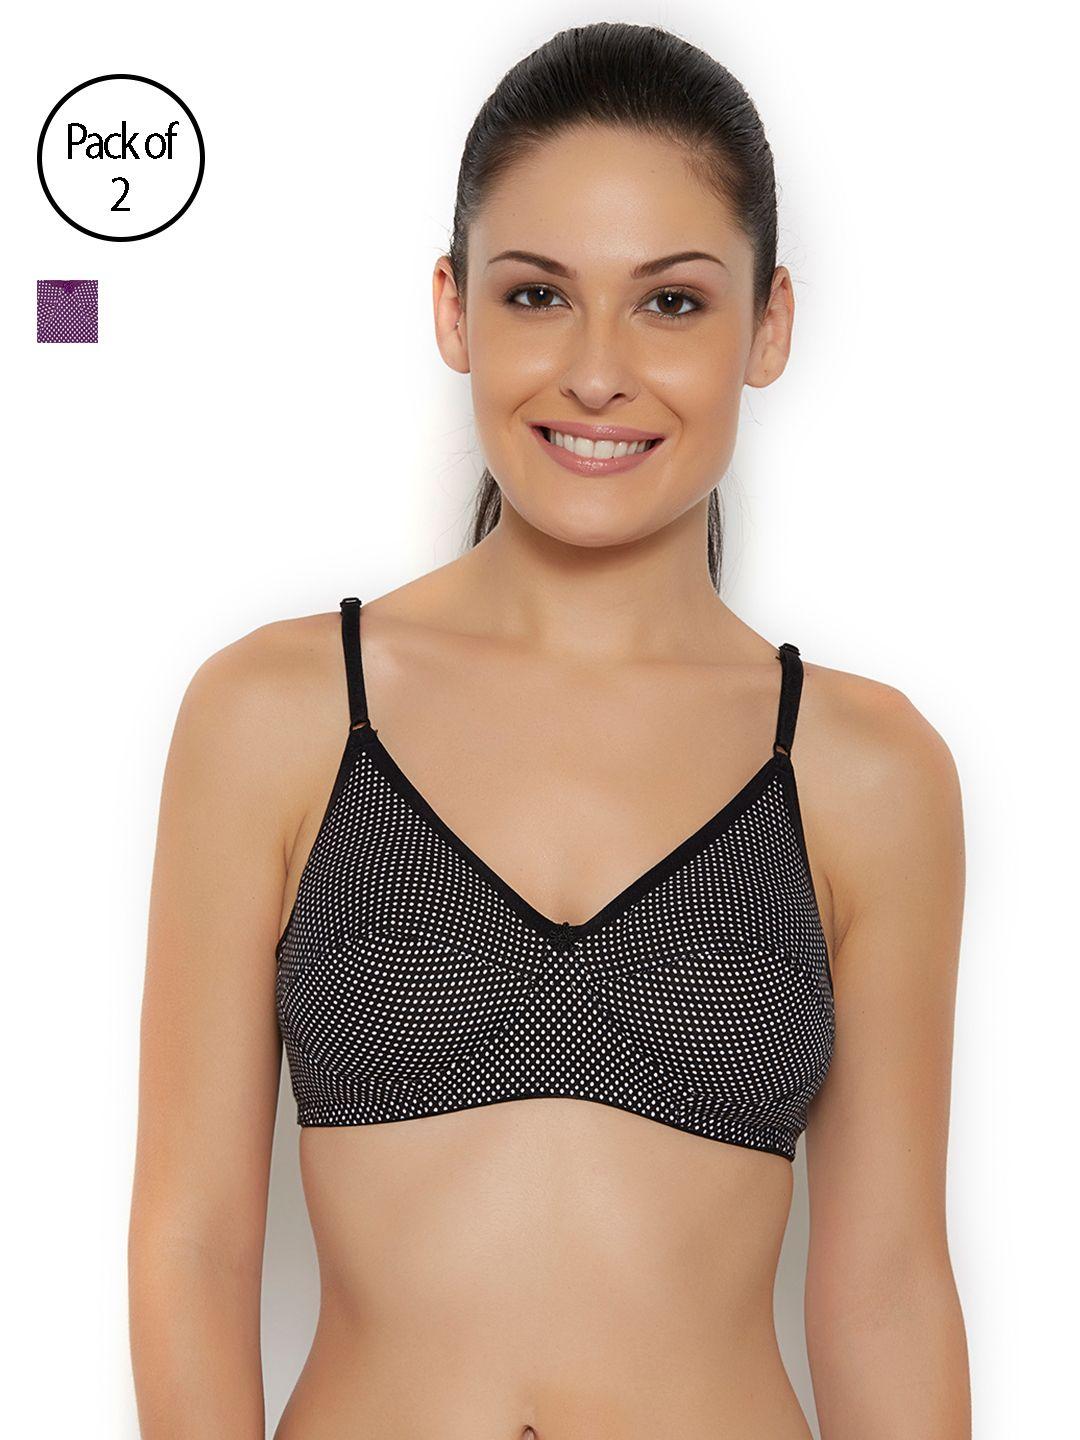 floret-women-pack-of-2-printed-non-wired-non-padded-t-shirt-bra-noori_black